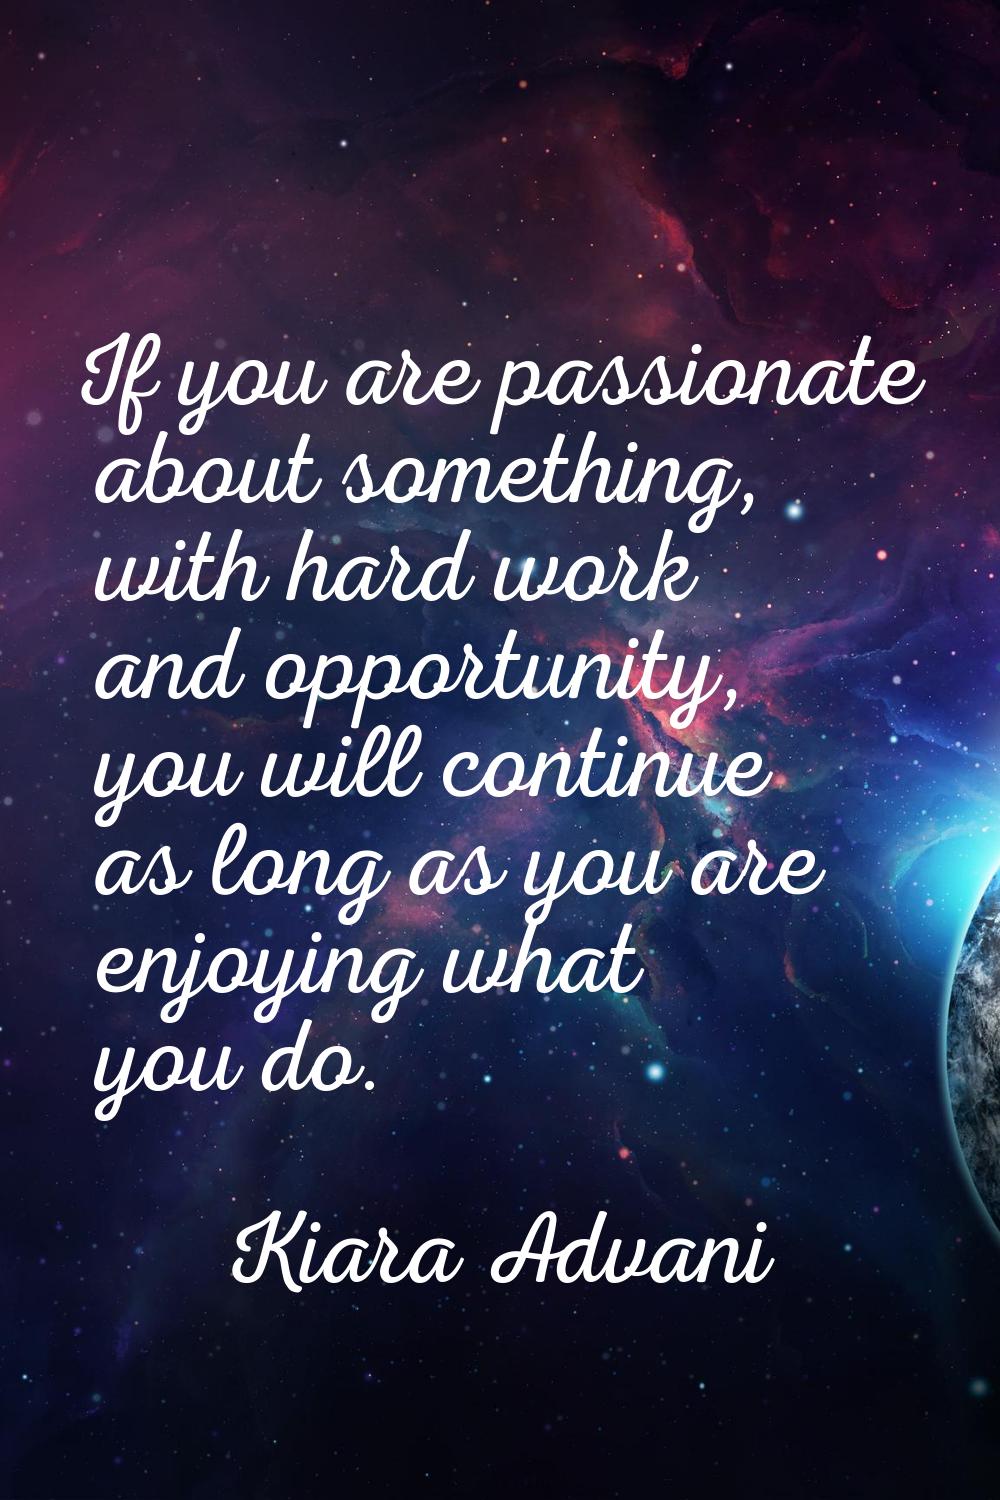 If you are passionate about something, with hard work and opportunity, you will continue as long as